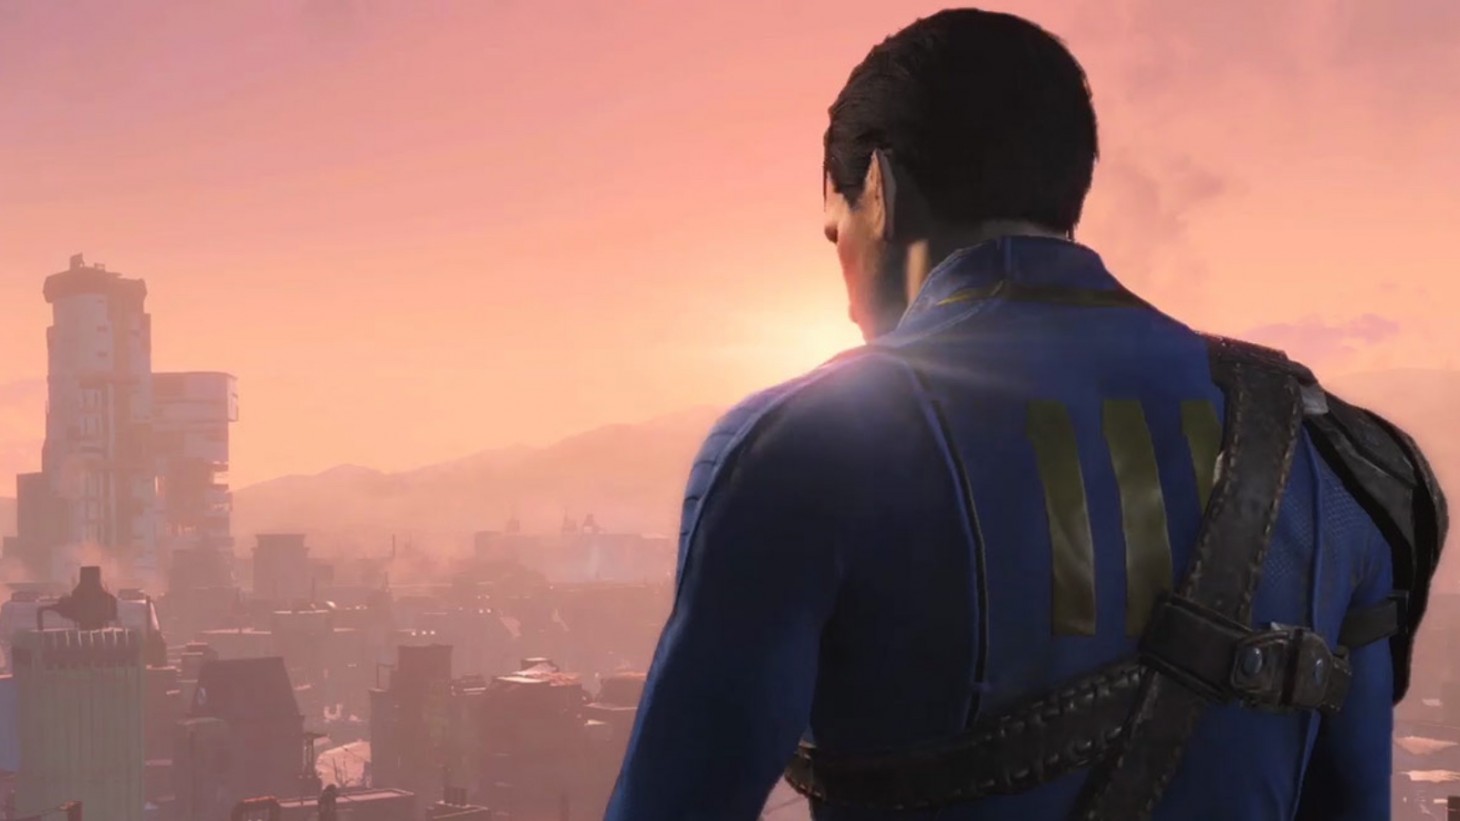 Fallout 4: New Vegas Features